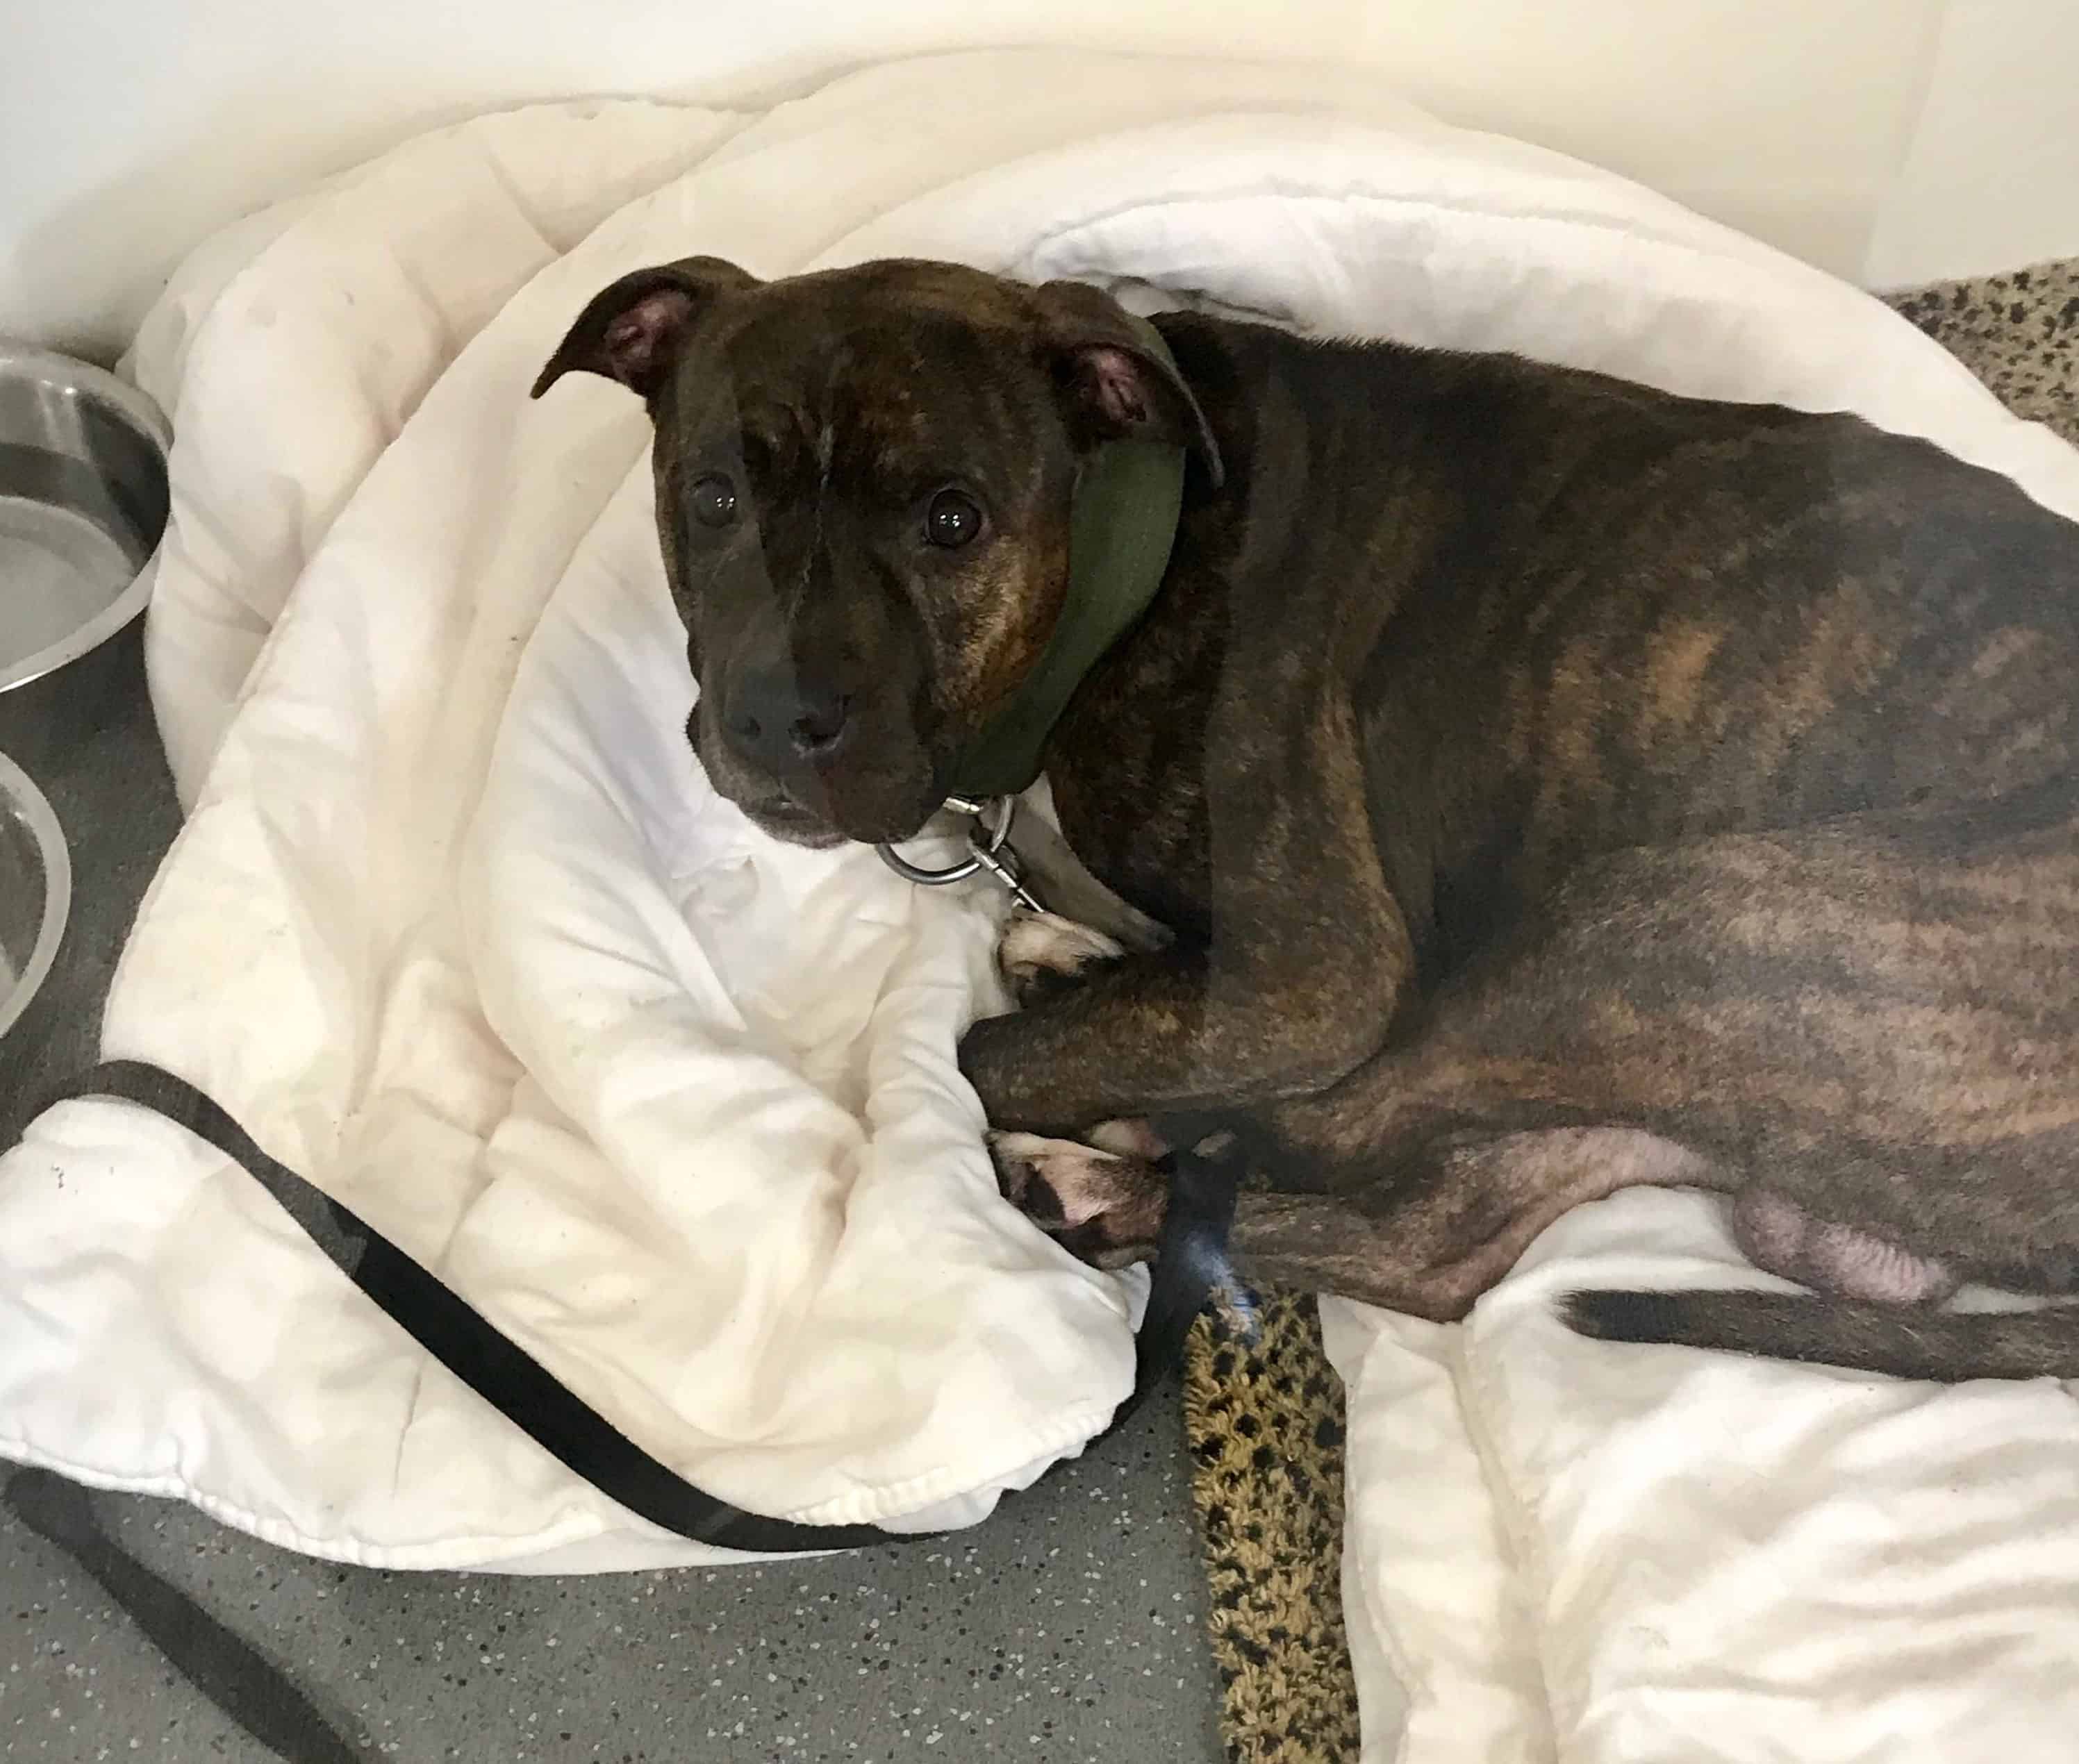 The RSPCA want to hear from anyone who knows how Jiffy came to be left on the estate that night Image: RSPCA